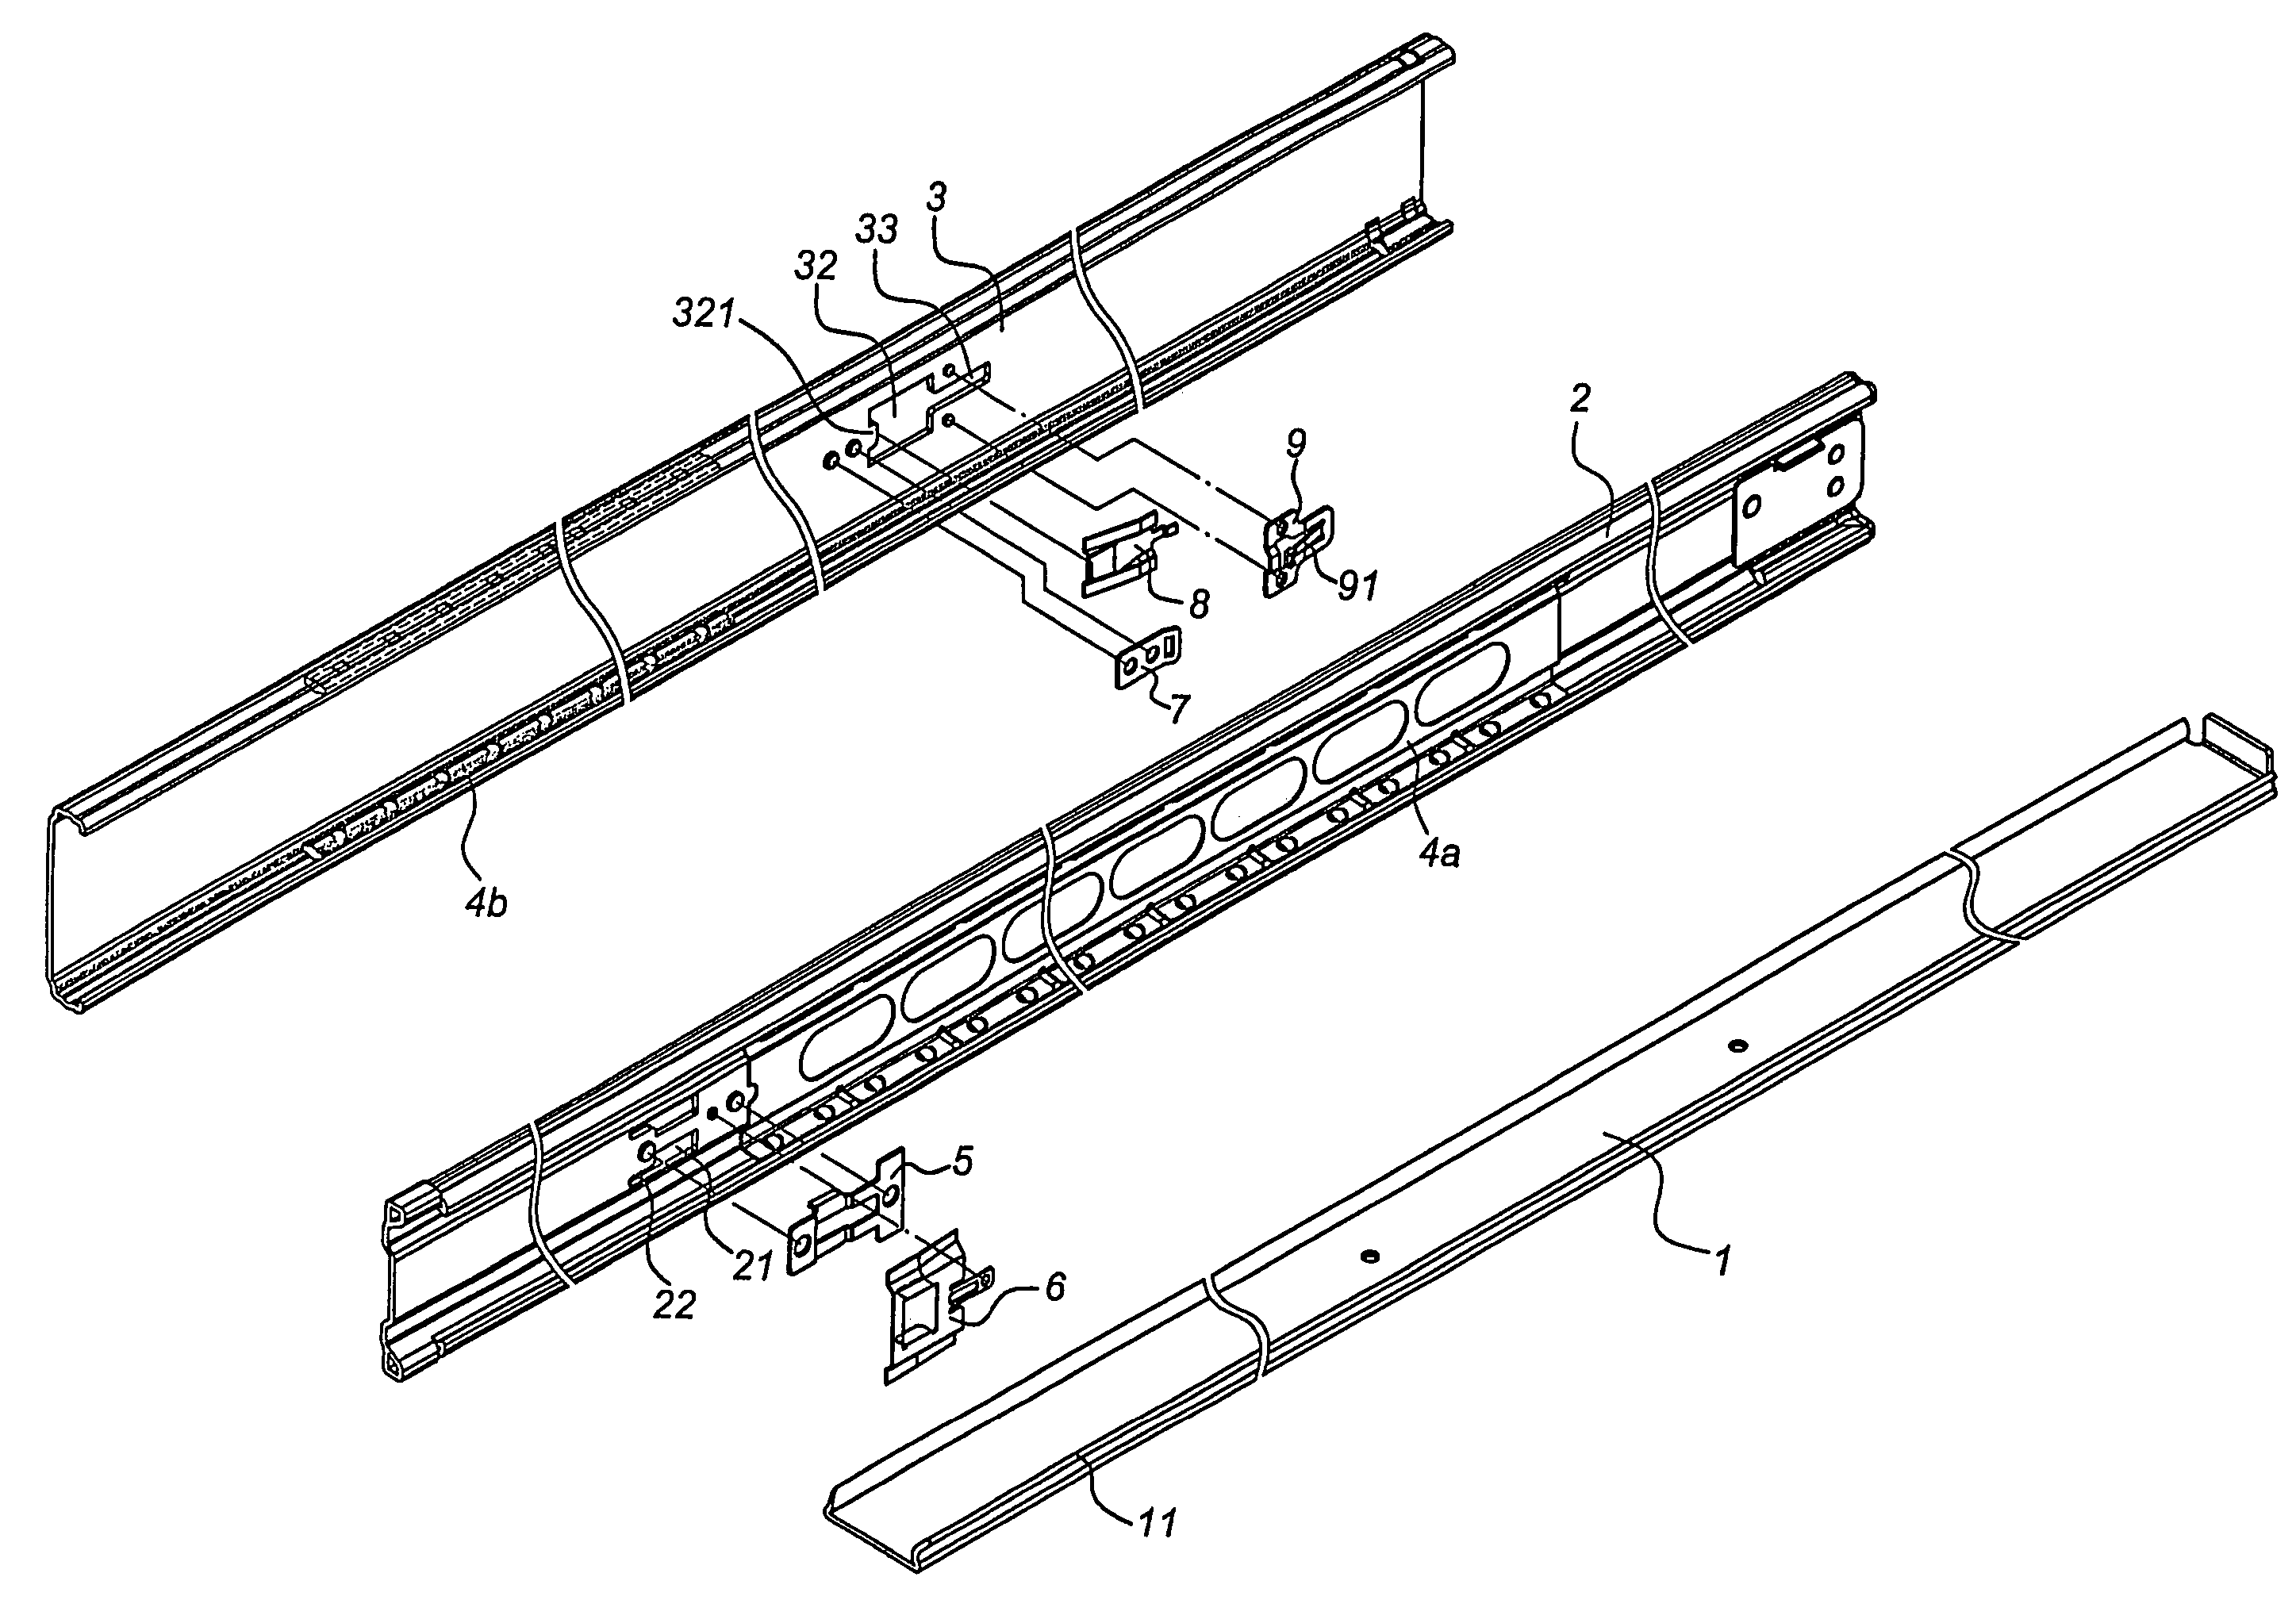 Retaining mechanism for a multi-section slide track assembly